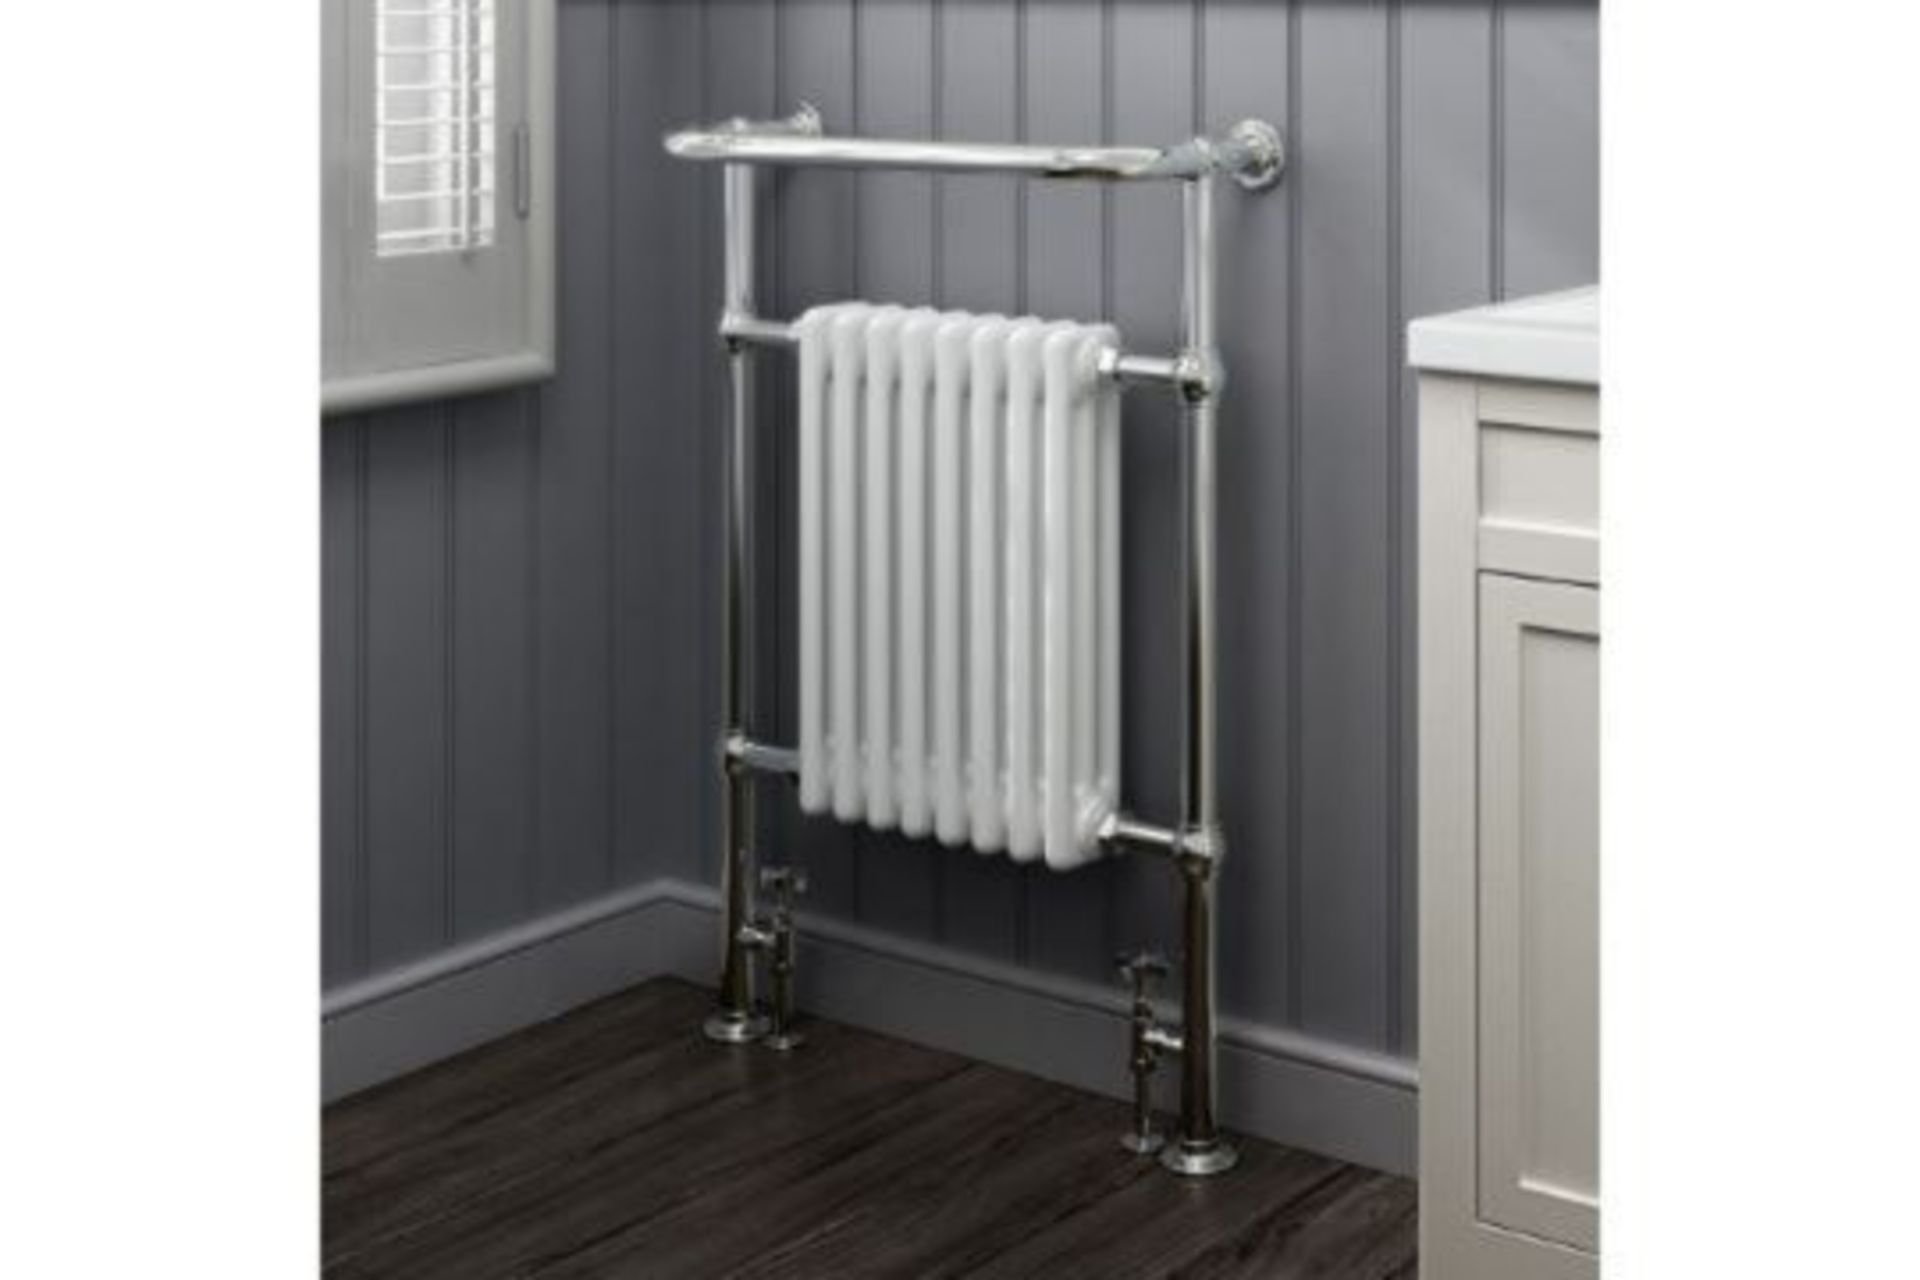 NEW 952x659mm Large Traditional White Premium Towel Rail Radiator.RRP £499.99.We love this because